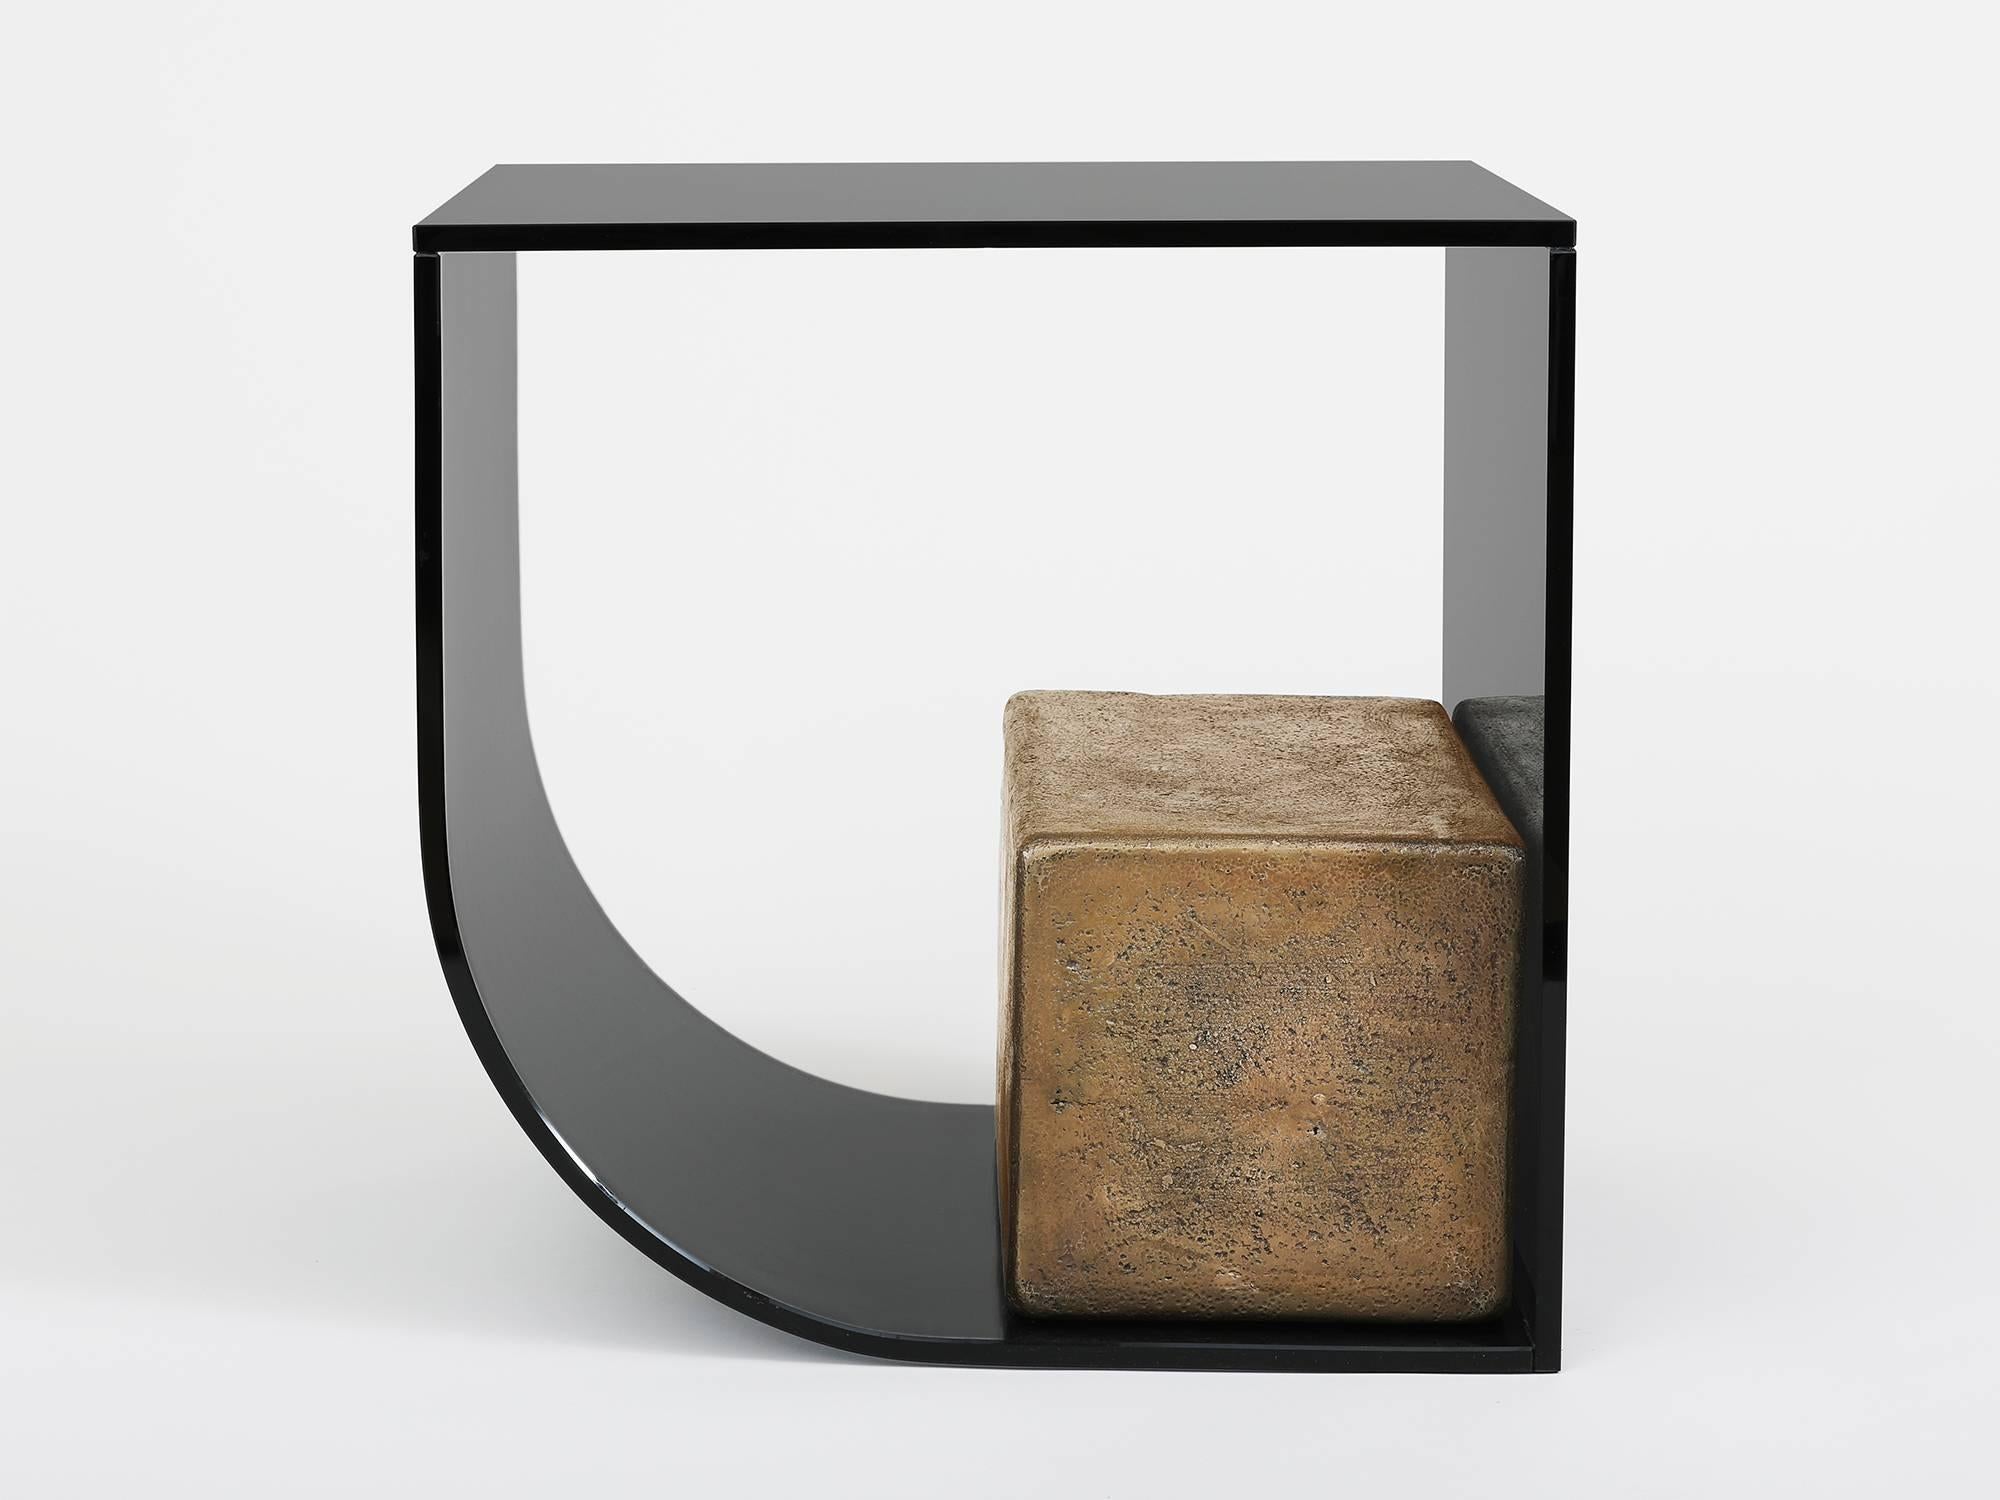 Side table by Los Angeles based designer Brian Thoreen. Made of curved grey glass and weighted upright by a cast bronze block. Also available in bronze glass. Edition of 8 + II AP.